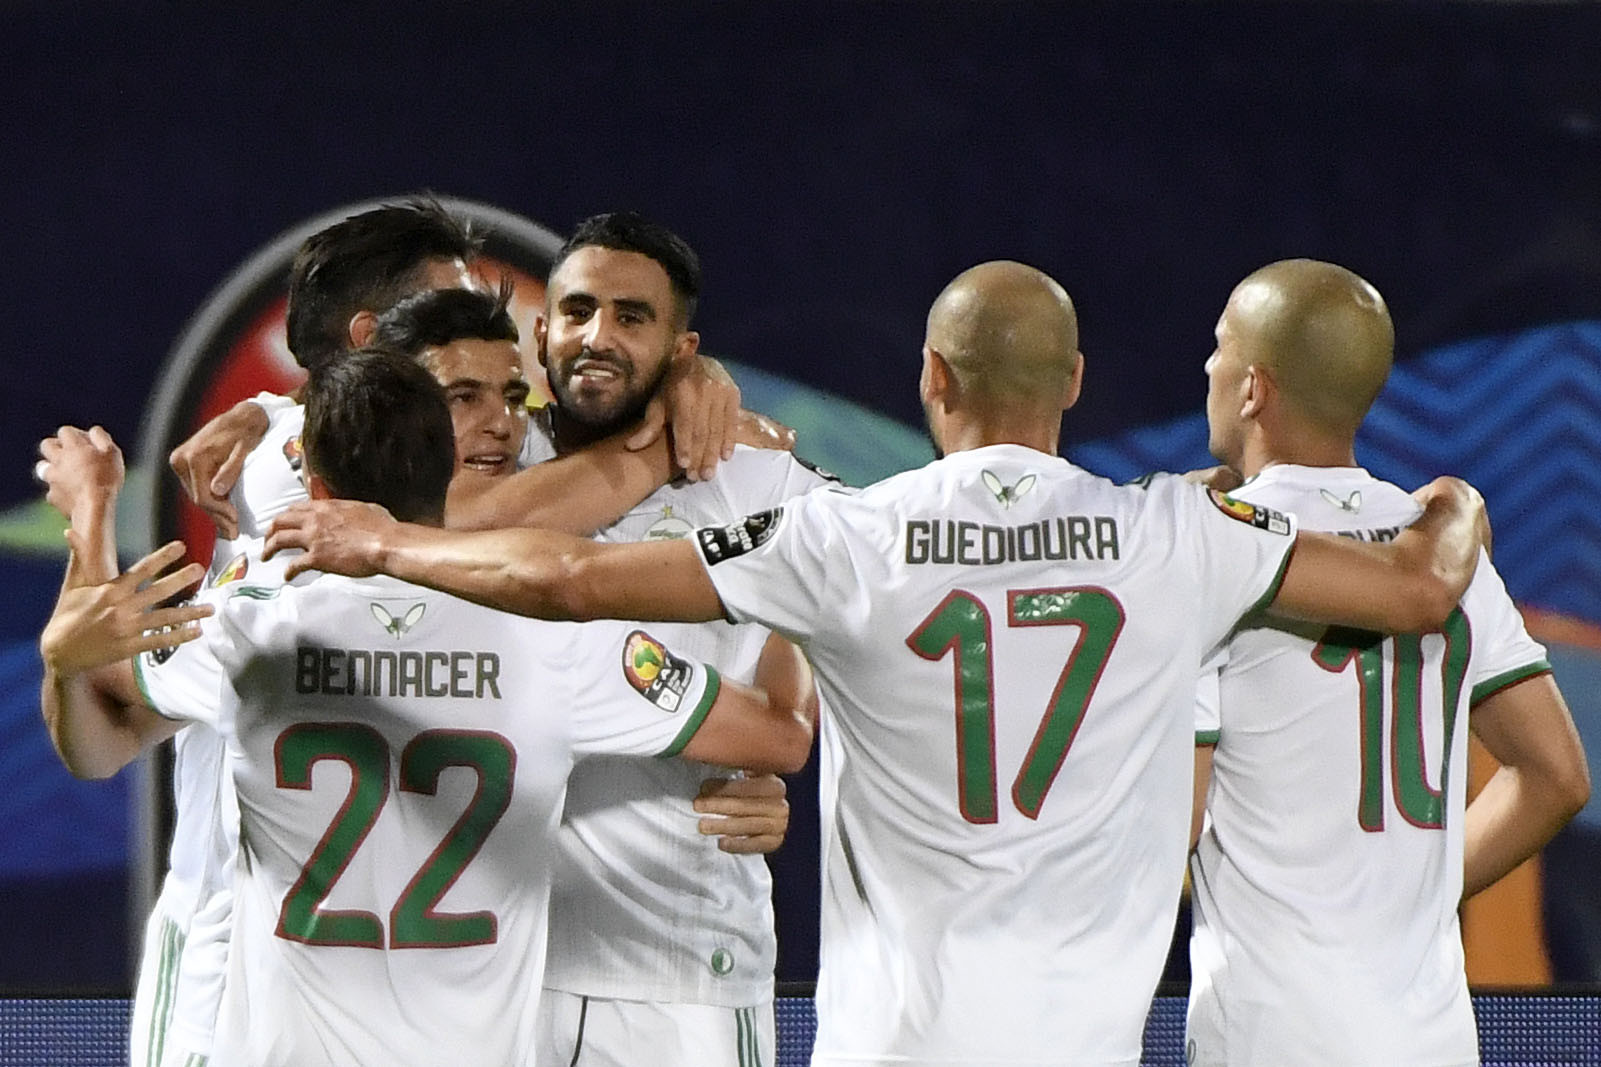 Riyad Mahrez, centre, was on target for Algeria in their win against Guinea ©Getty Images